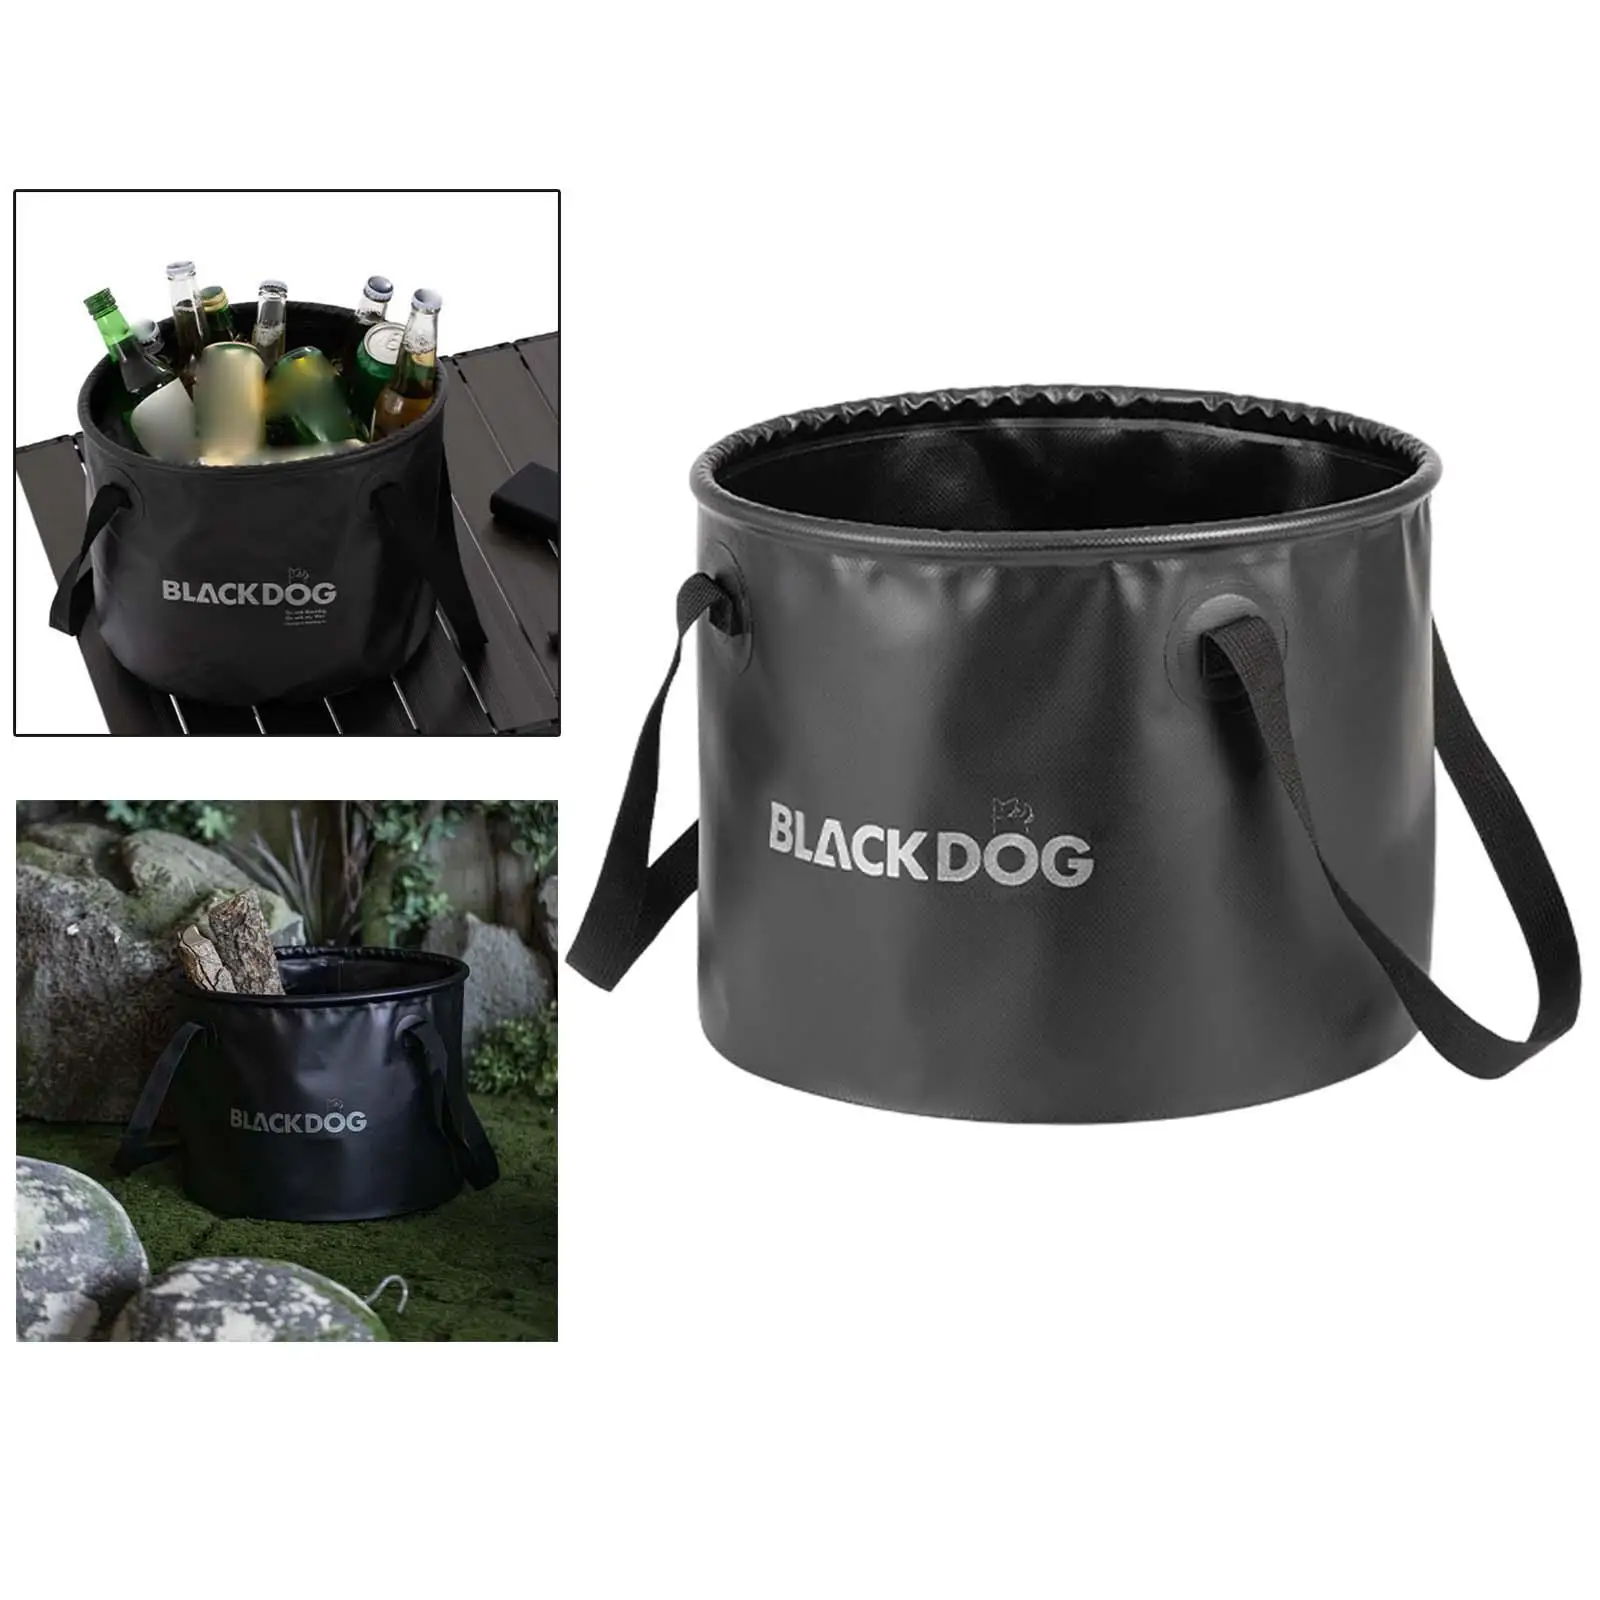 Foldable Round Bucket Portable with Handle 20L Mesh Pocket for Cackpacking